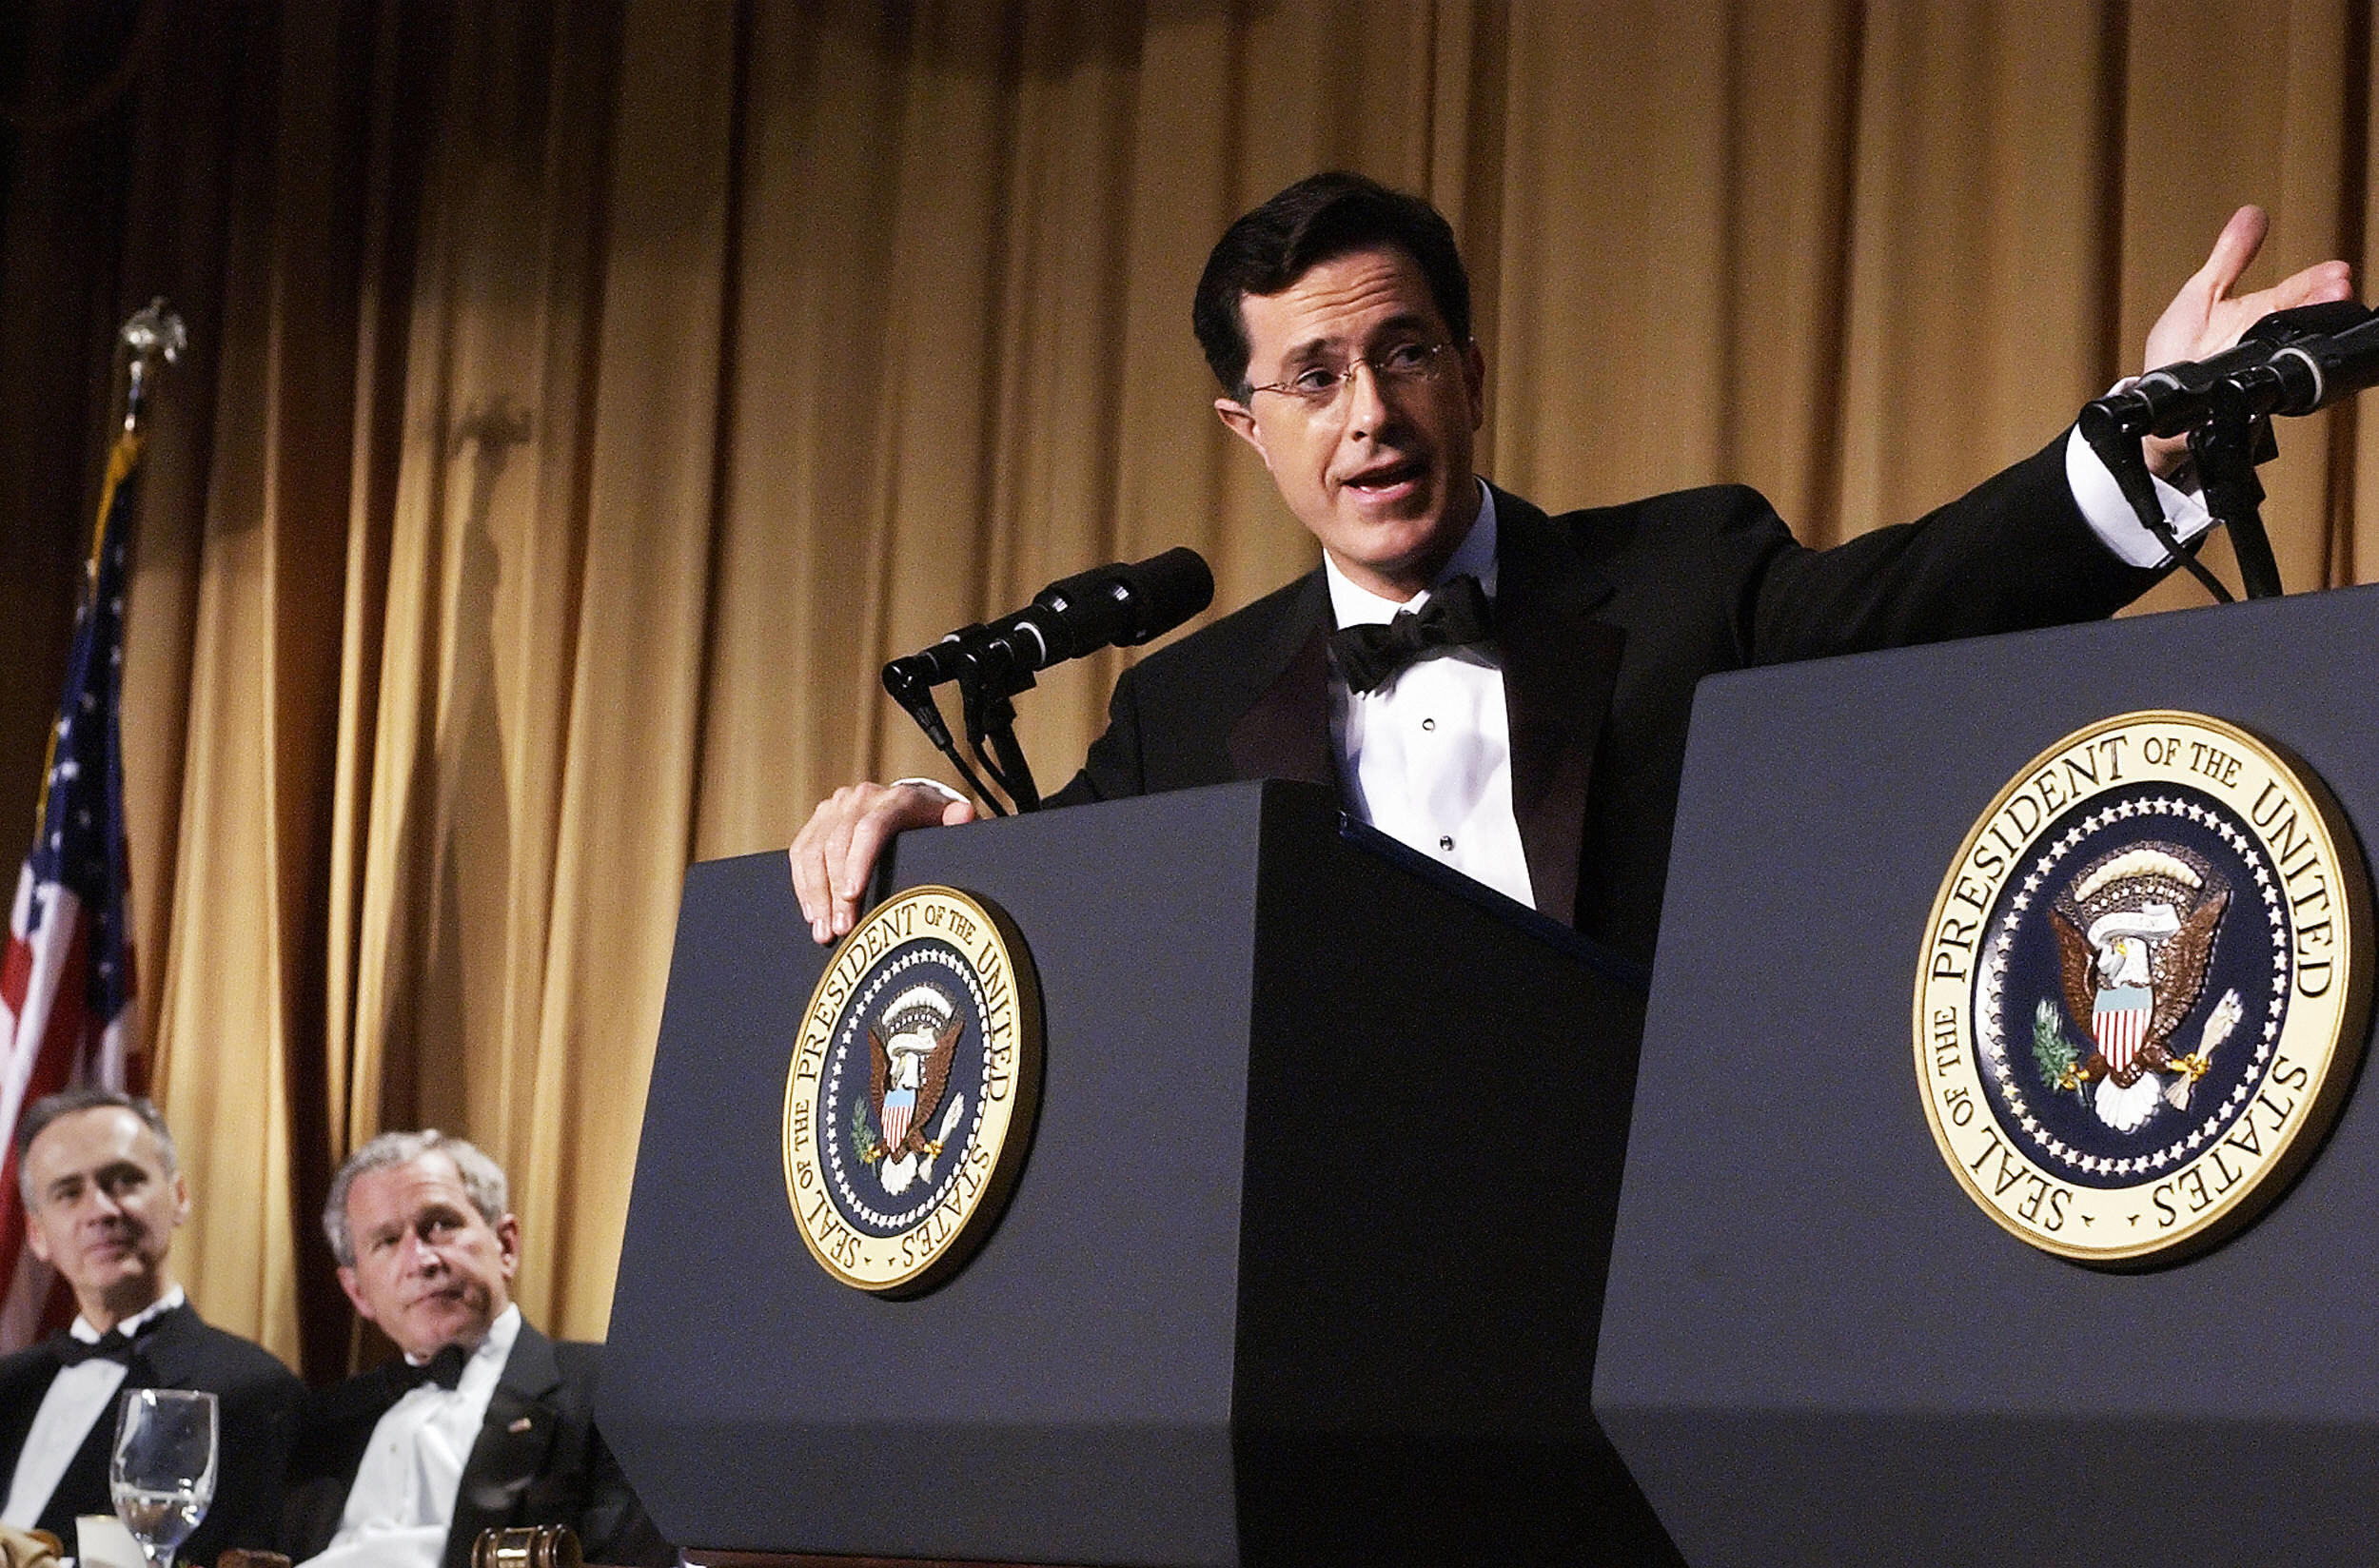 PHOTO: Guest host Stephen Colbert speaks as then-President George W. Bush and Tom Curley of the Associated Press look on at the White House Correspondents' Association Dinner, April 29, 2006, at the Washington Hilton Hotel in Washington.